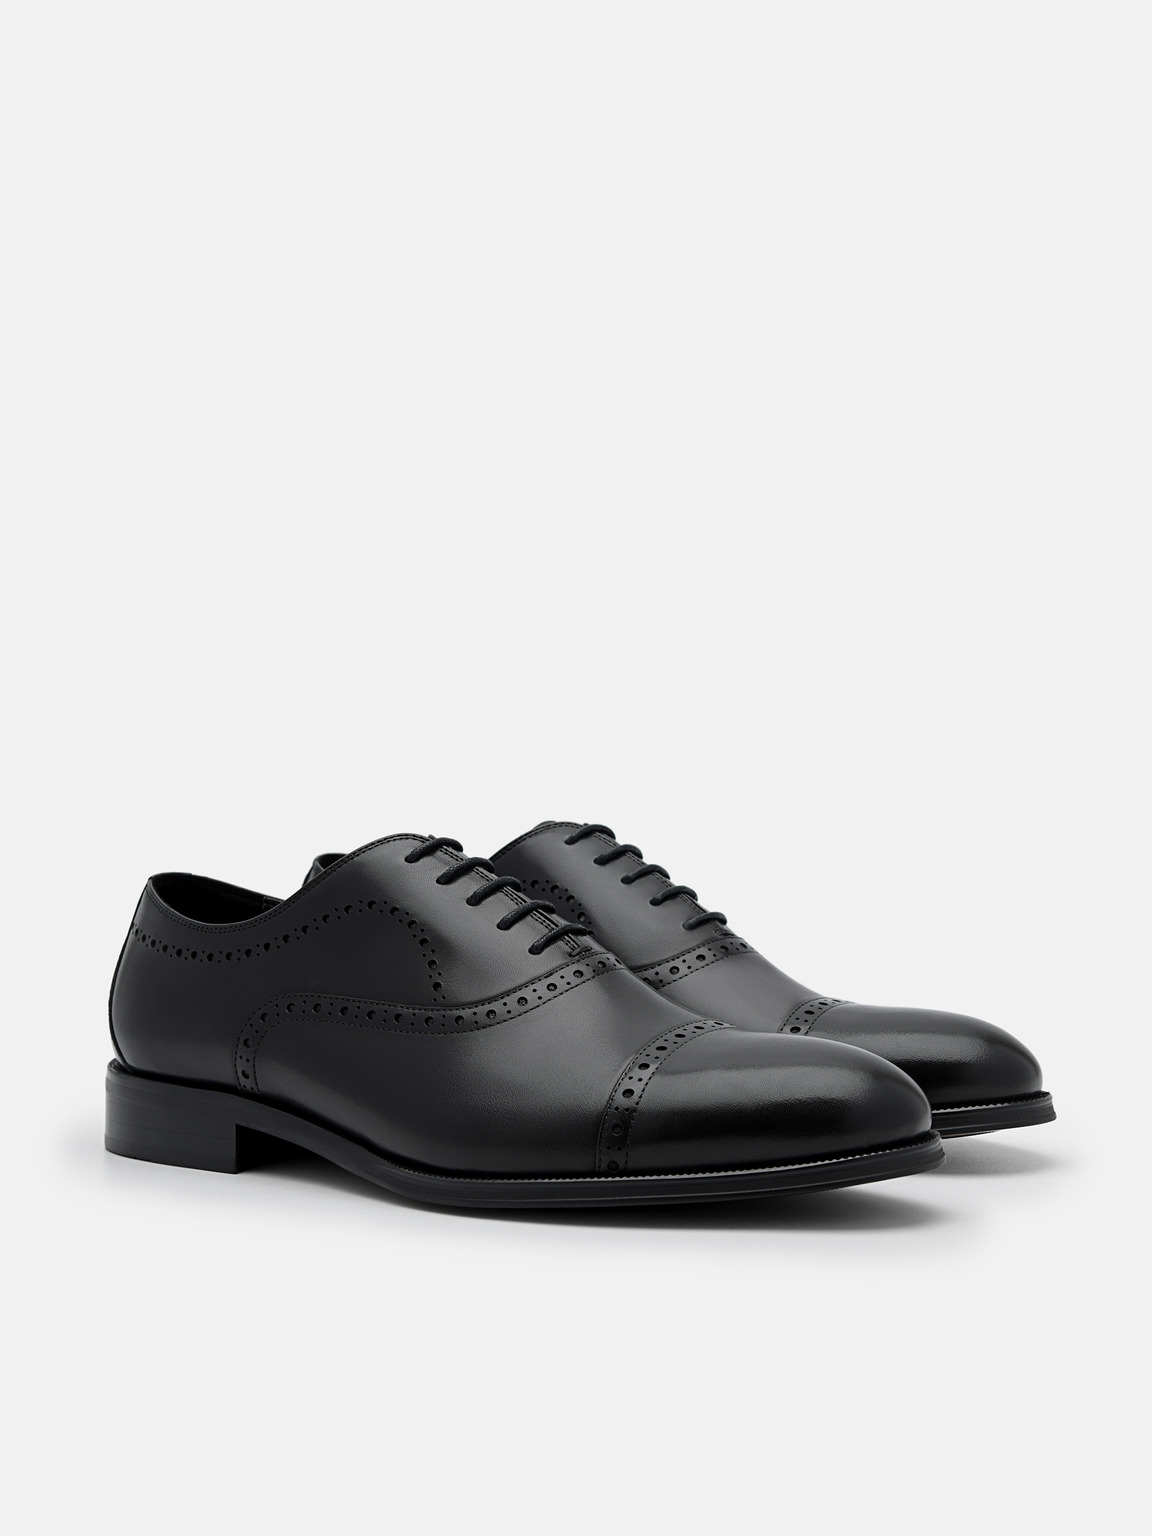 Leather Brogue Oxford Shoes, Black